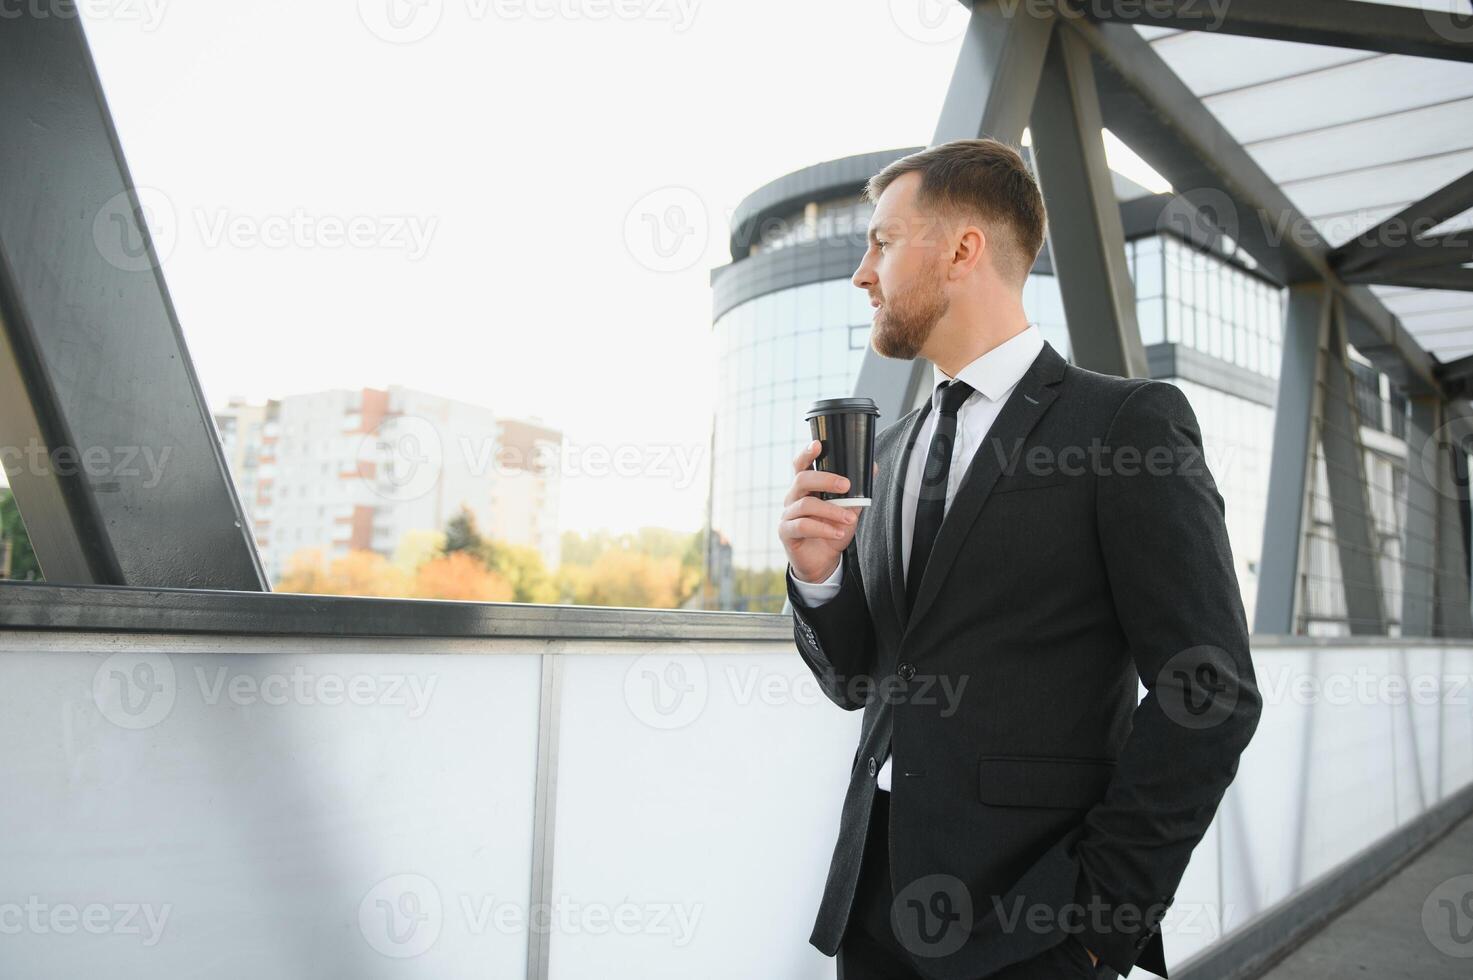 Takeaway coffee. Walk and enjoy fresh hot coffee. Waiting for someone in street. Man bearded hipster drink coffee paper cup. Businessman well groomed enjoy coffee break outdoors urban background photo